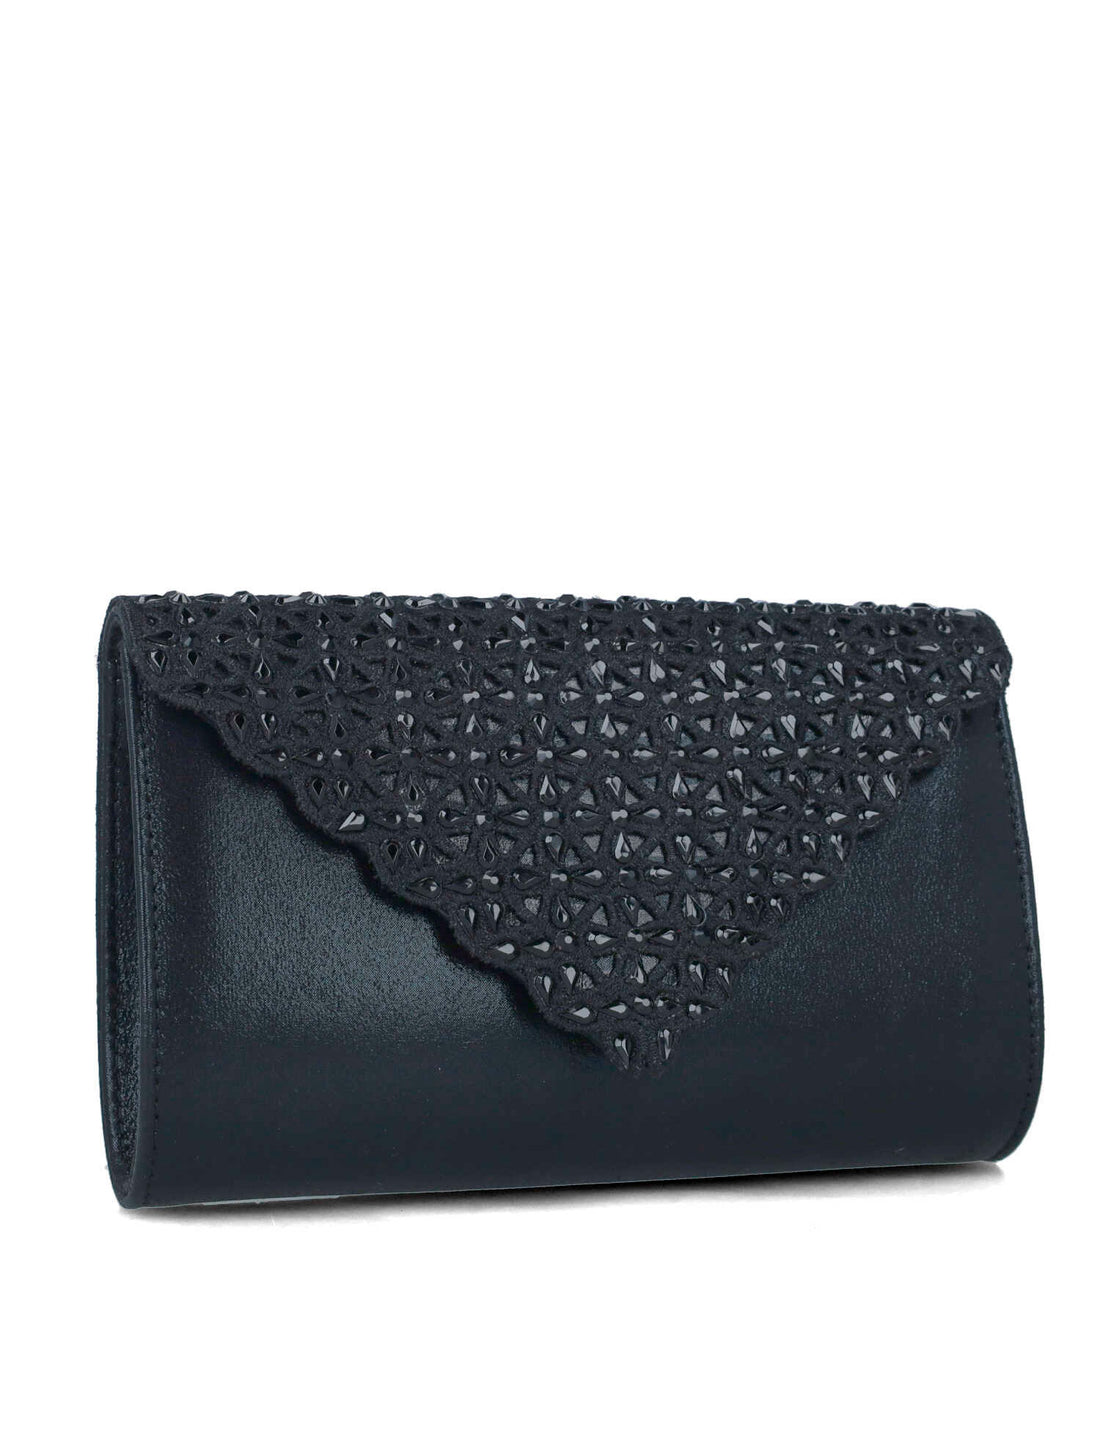 Black Clutch With Embellished Flap_85540_01_02